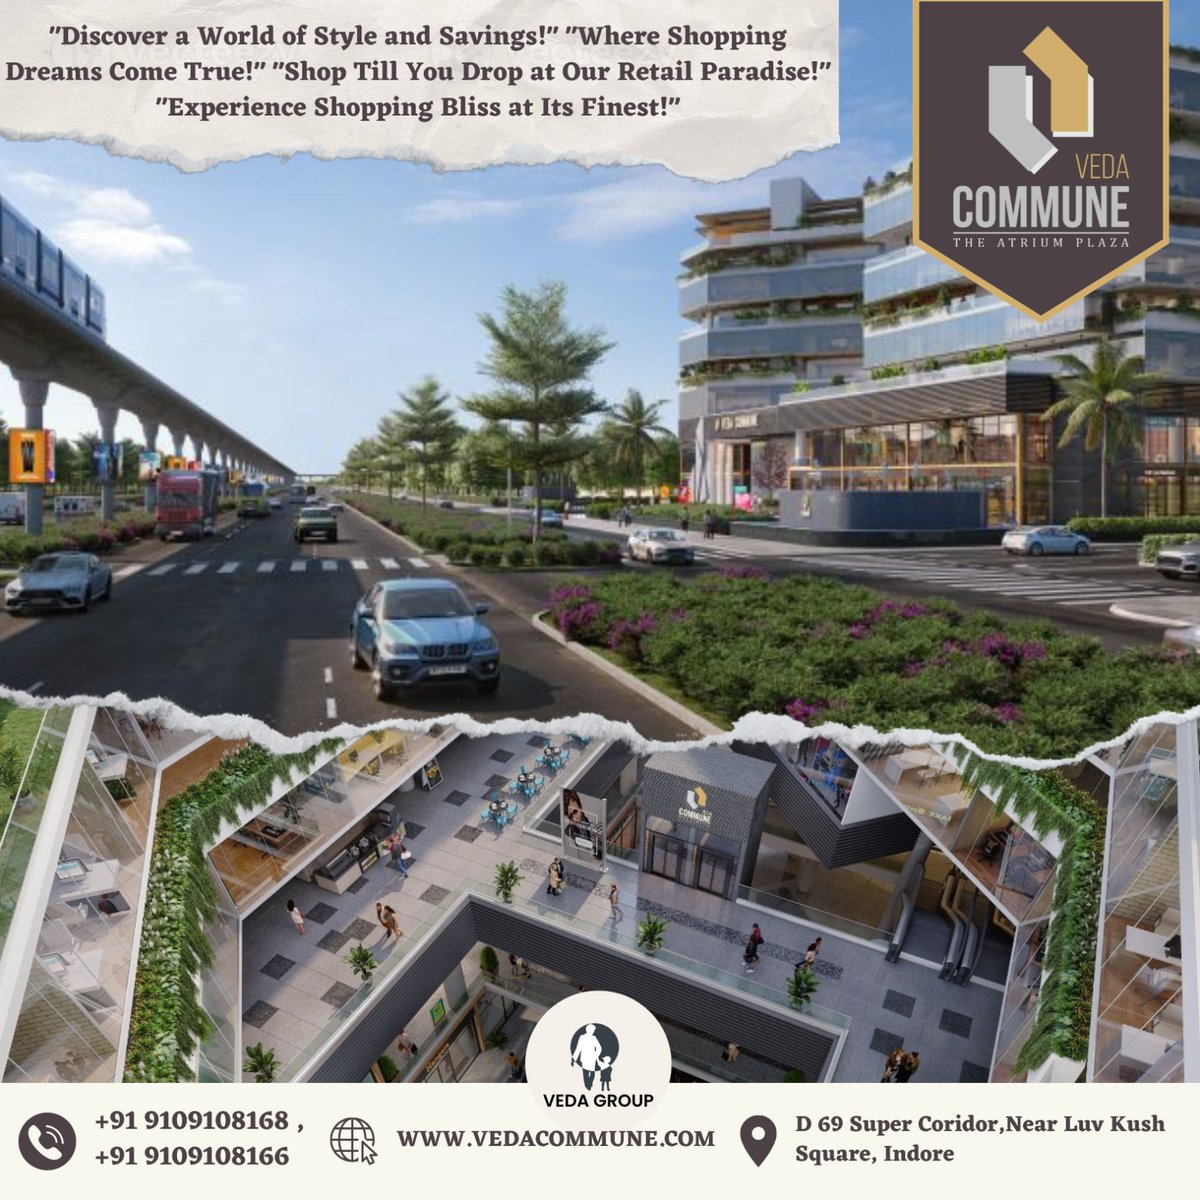 Unveiling Veda Commune, the most anticipated mall by Veda Group. Book your space and be a part of something extraordinary. #VedaCommune #VedaGroup #RetailRevolution #ComingSoon
.
.
#VedaCommune #CommercialSpaces #LuxuryBrands #CuttingEdgeDesign
#UnmatchedCustomerTraffic